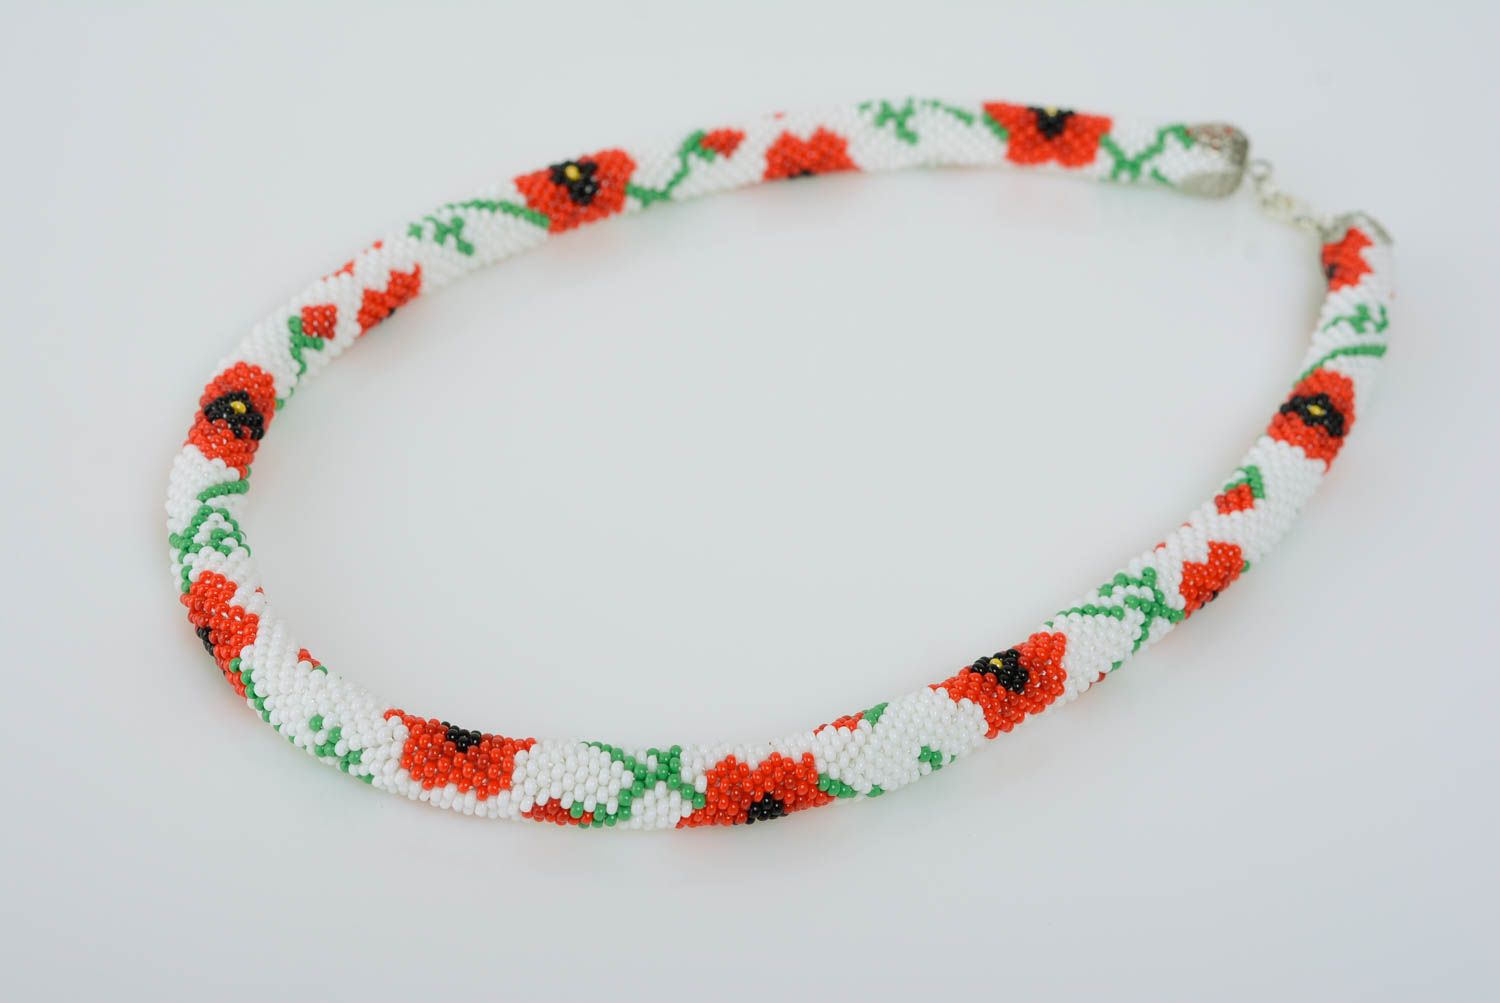 Beaded handmade cord necklace with flowers red poppies on white background photo 1